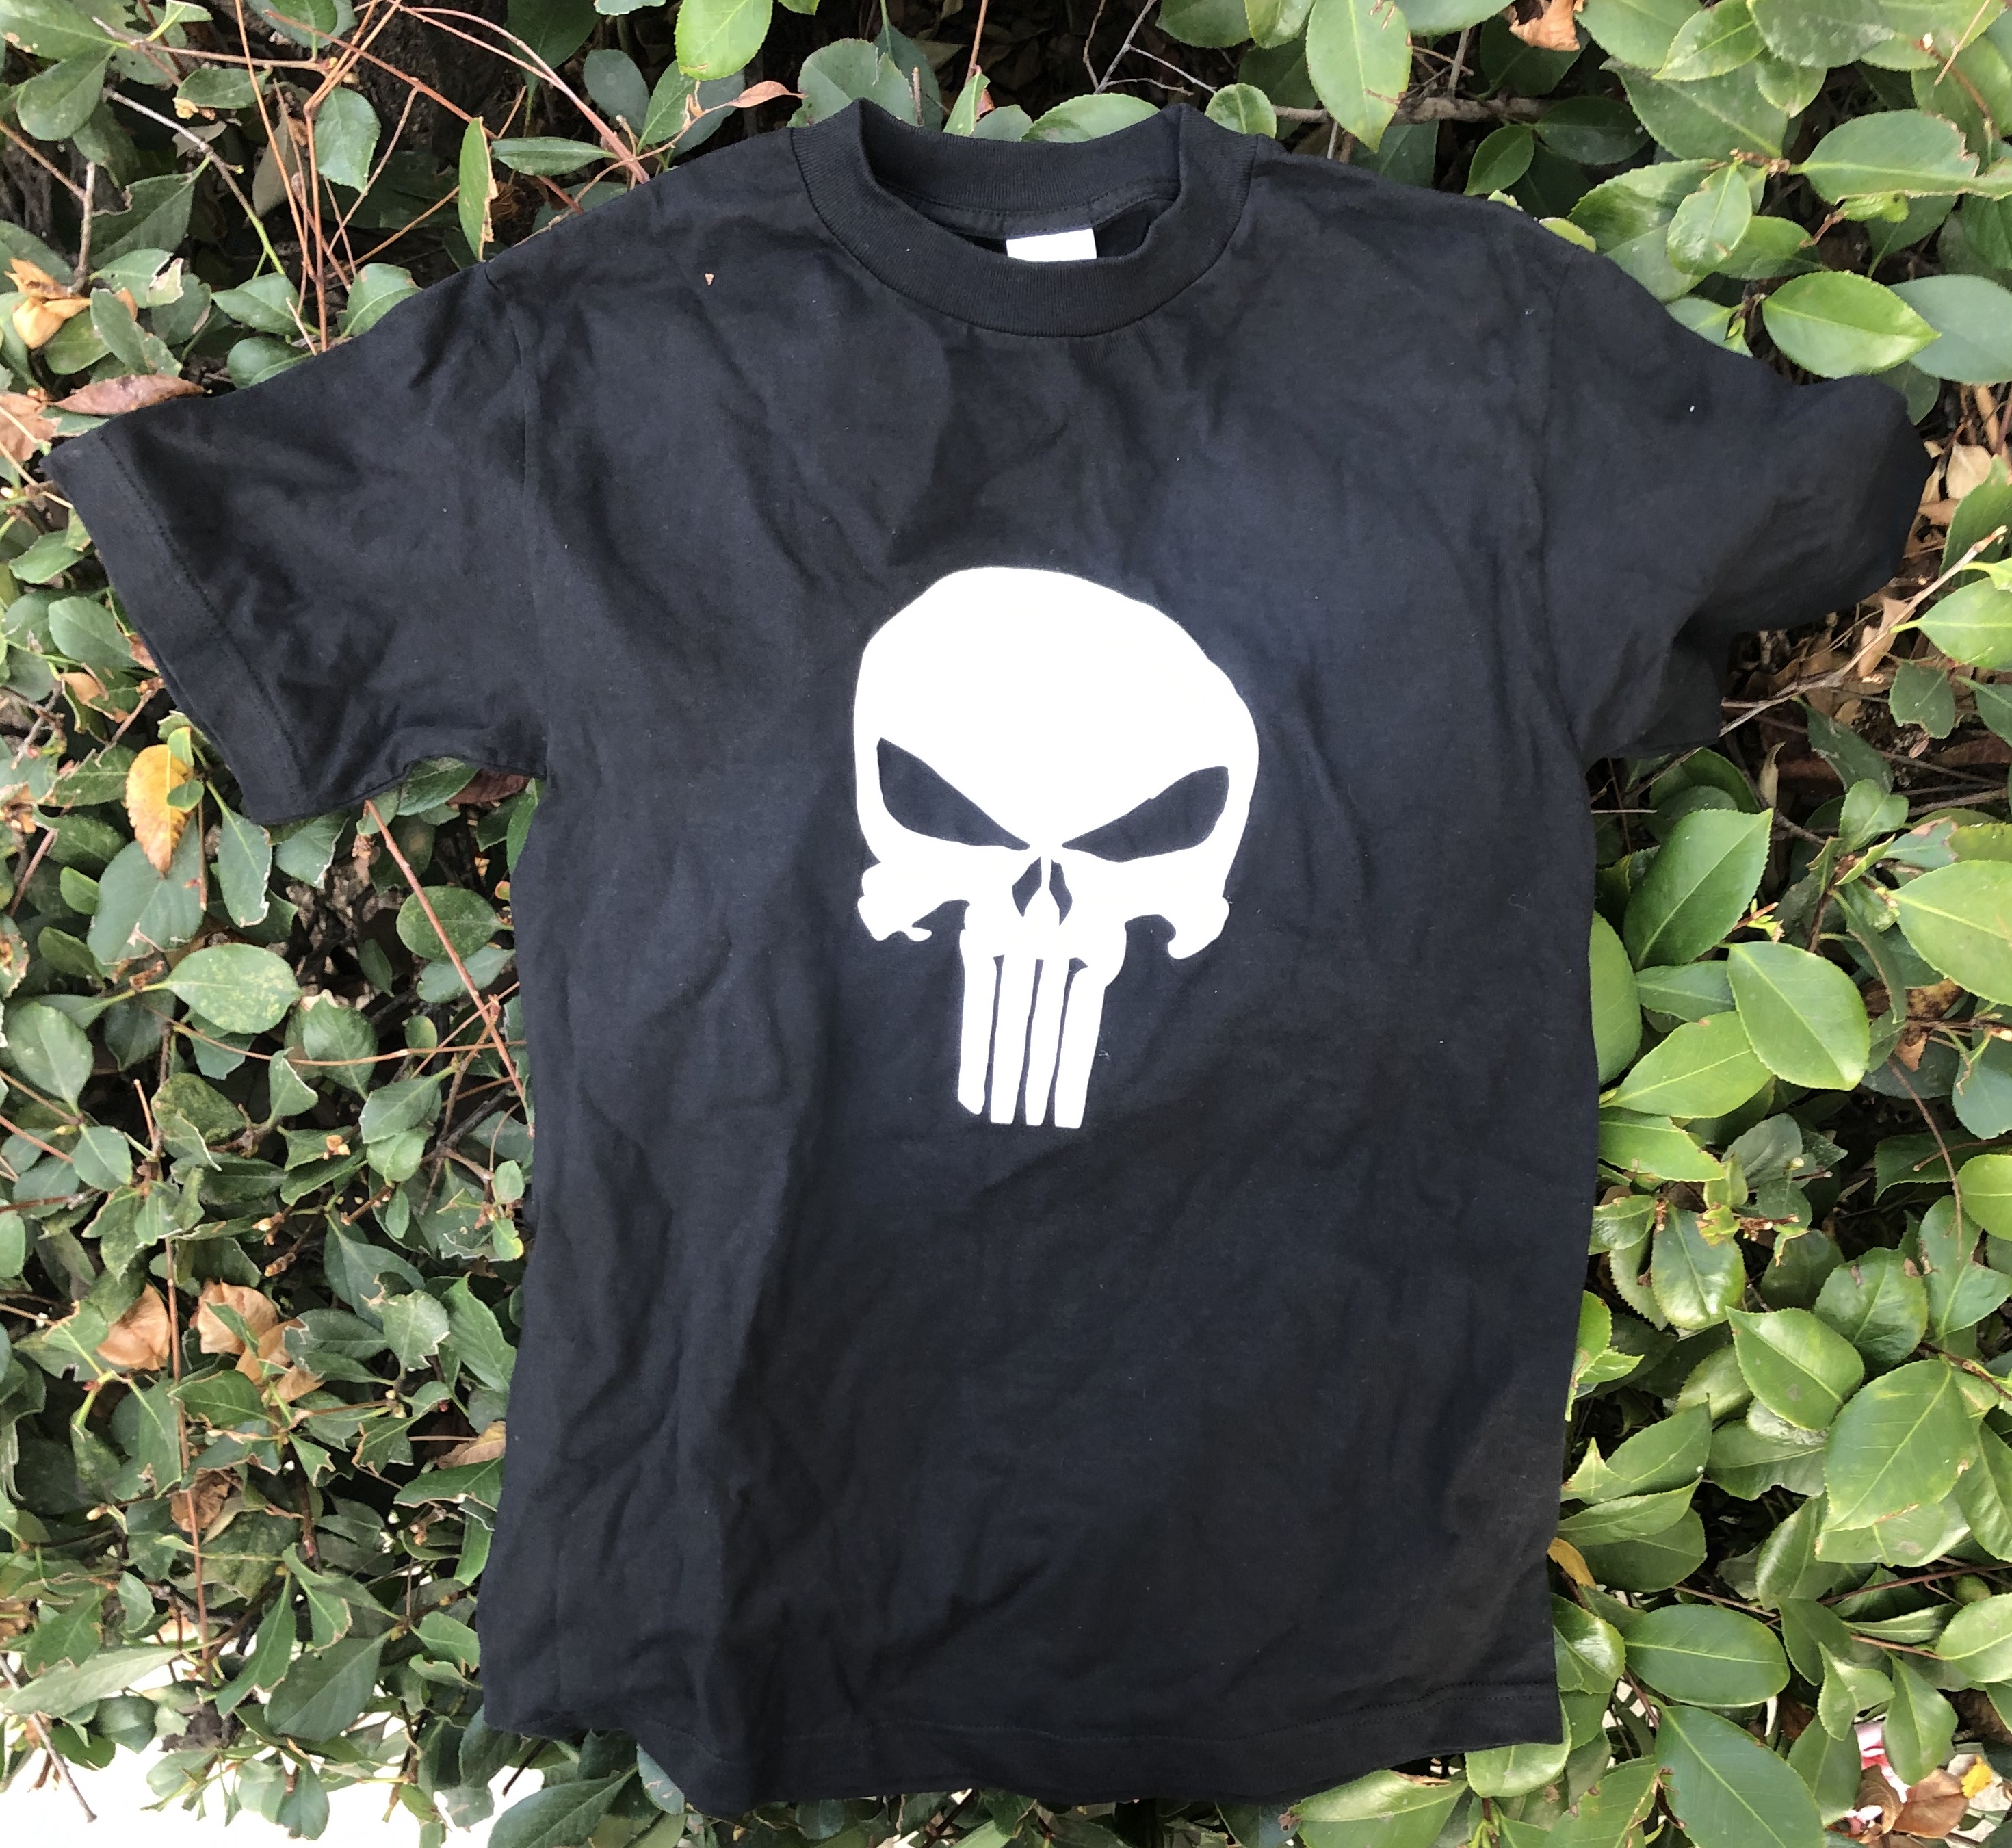 Punisher T-shirt front